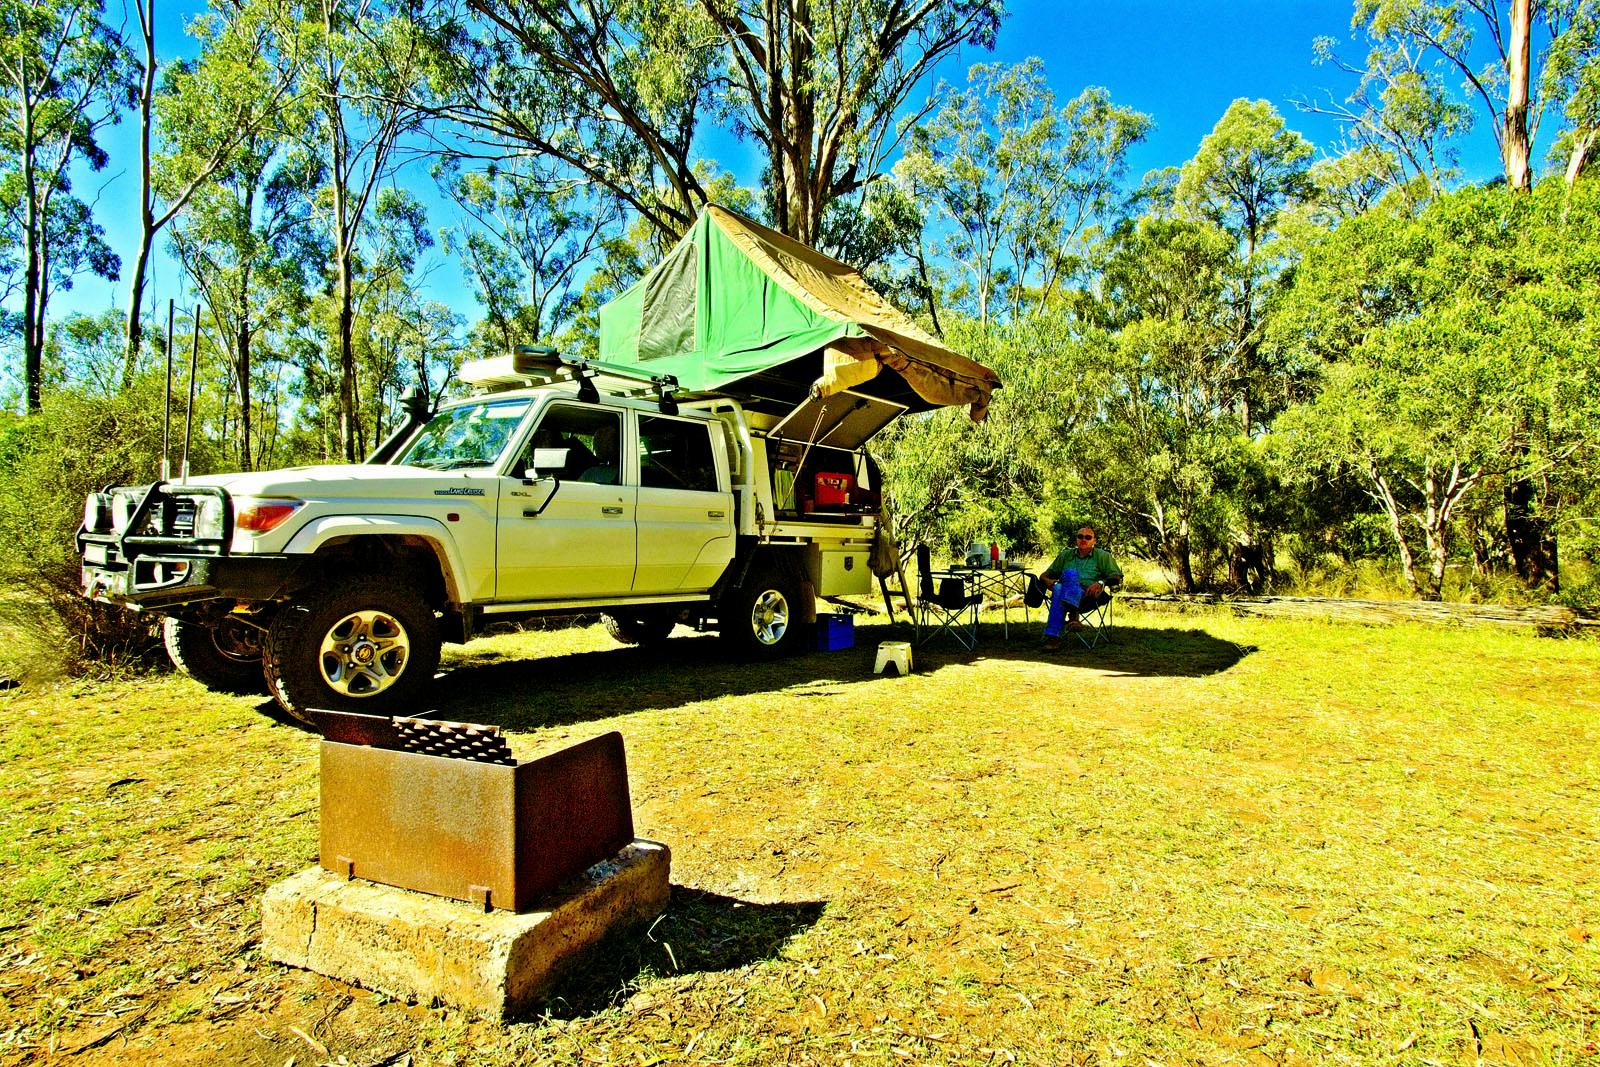 Finding a bit of shade at our serene campsite  in Lake Broadwater Conservation Park